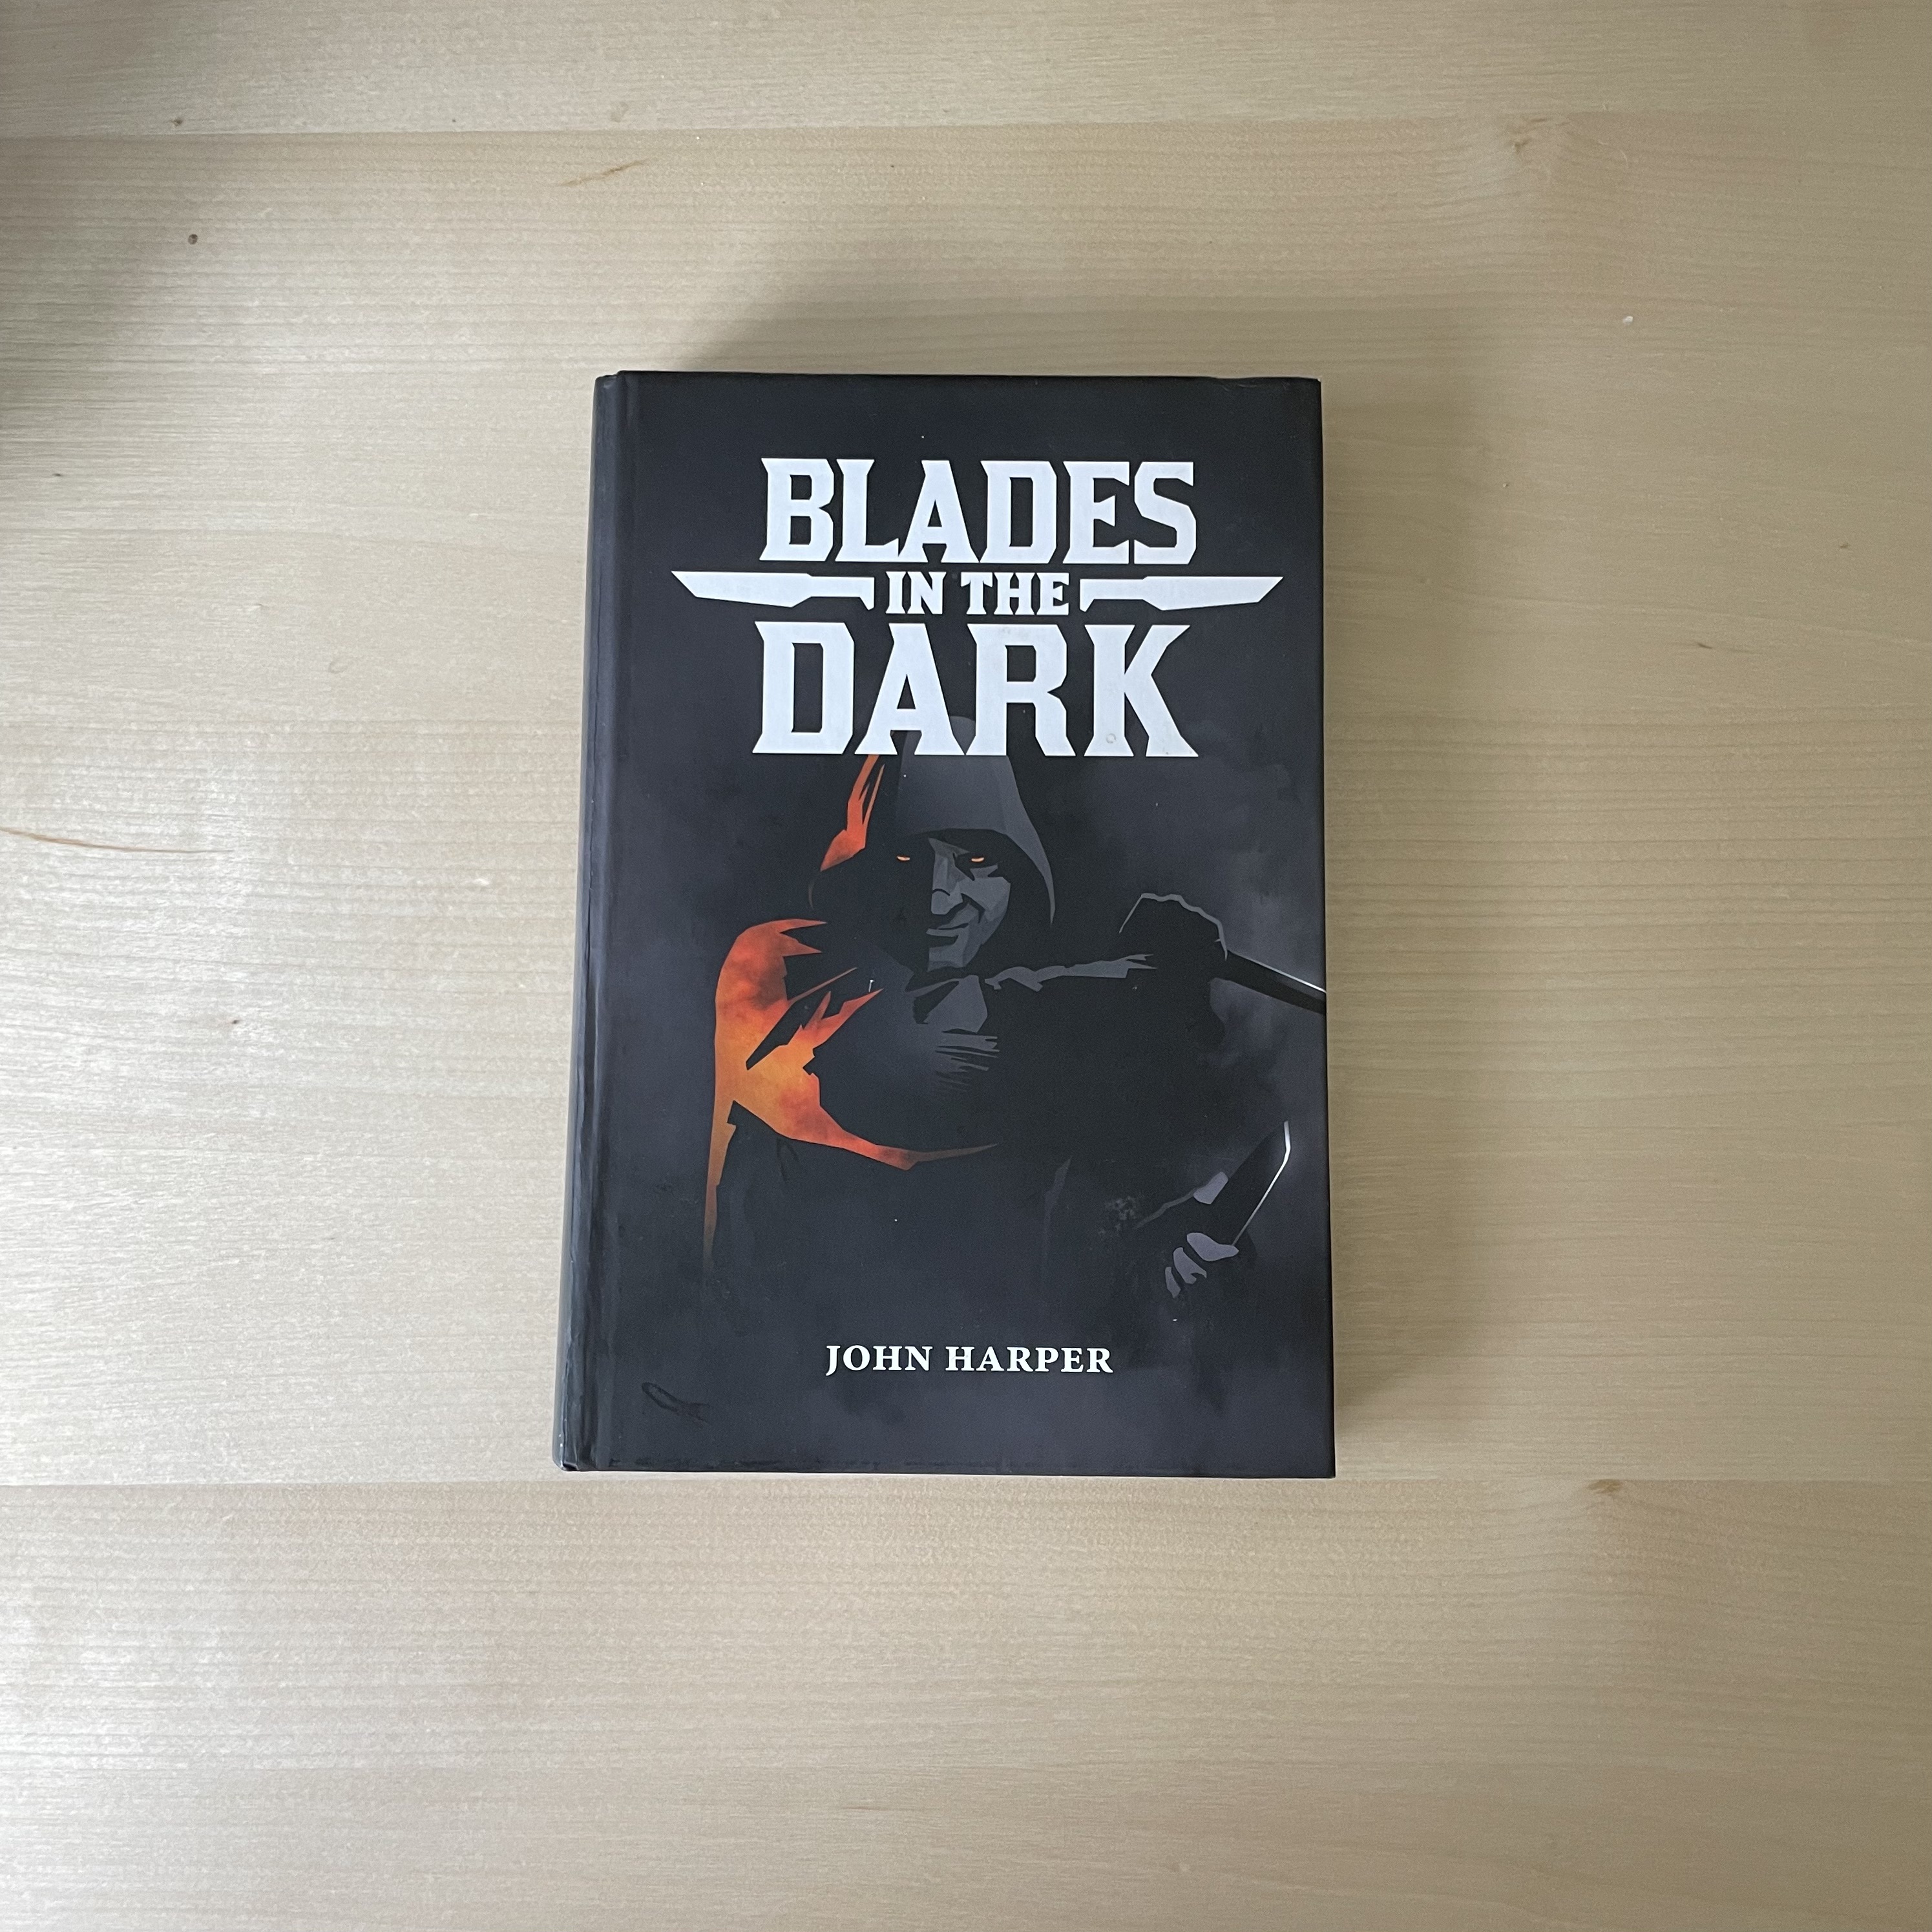 The Blades in the Dark rulebook